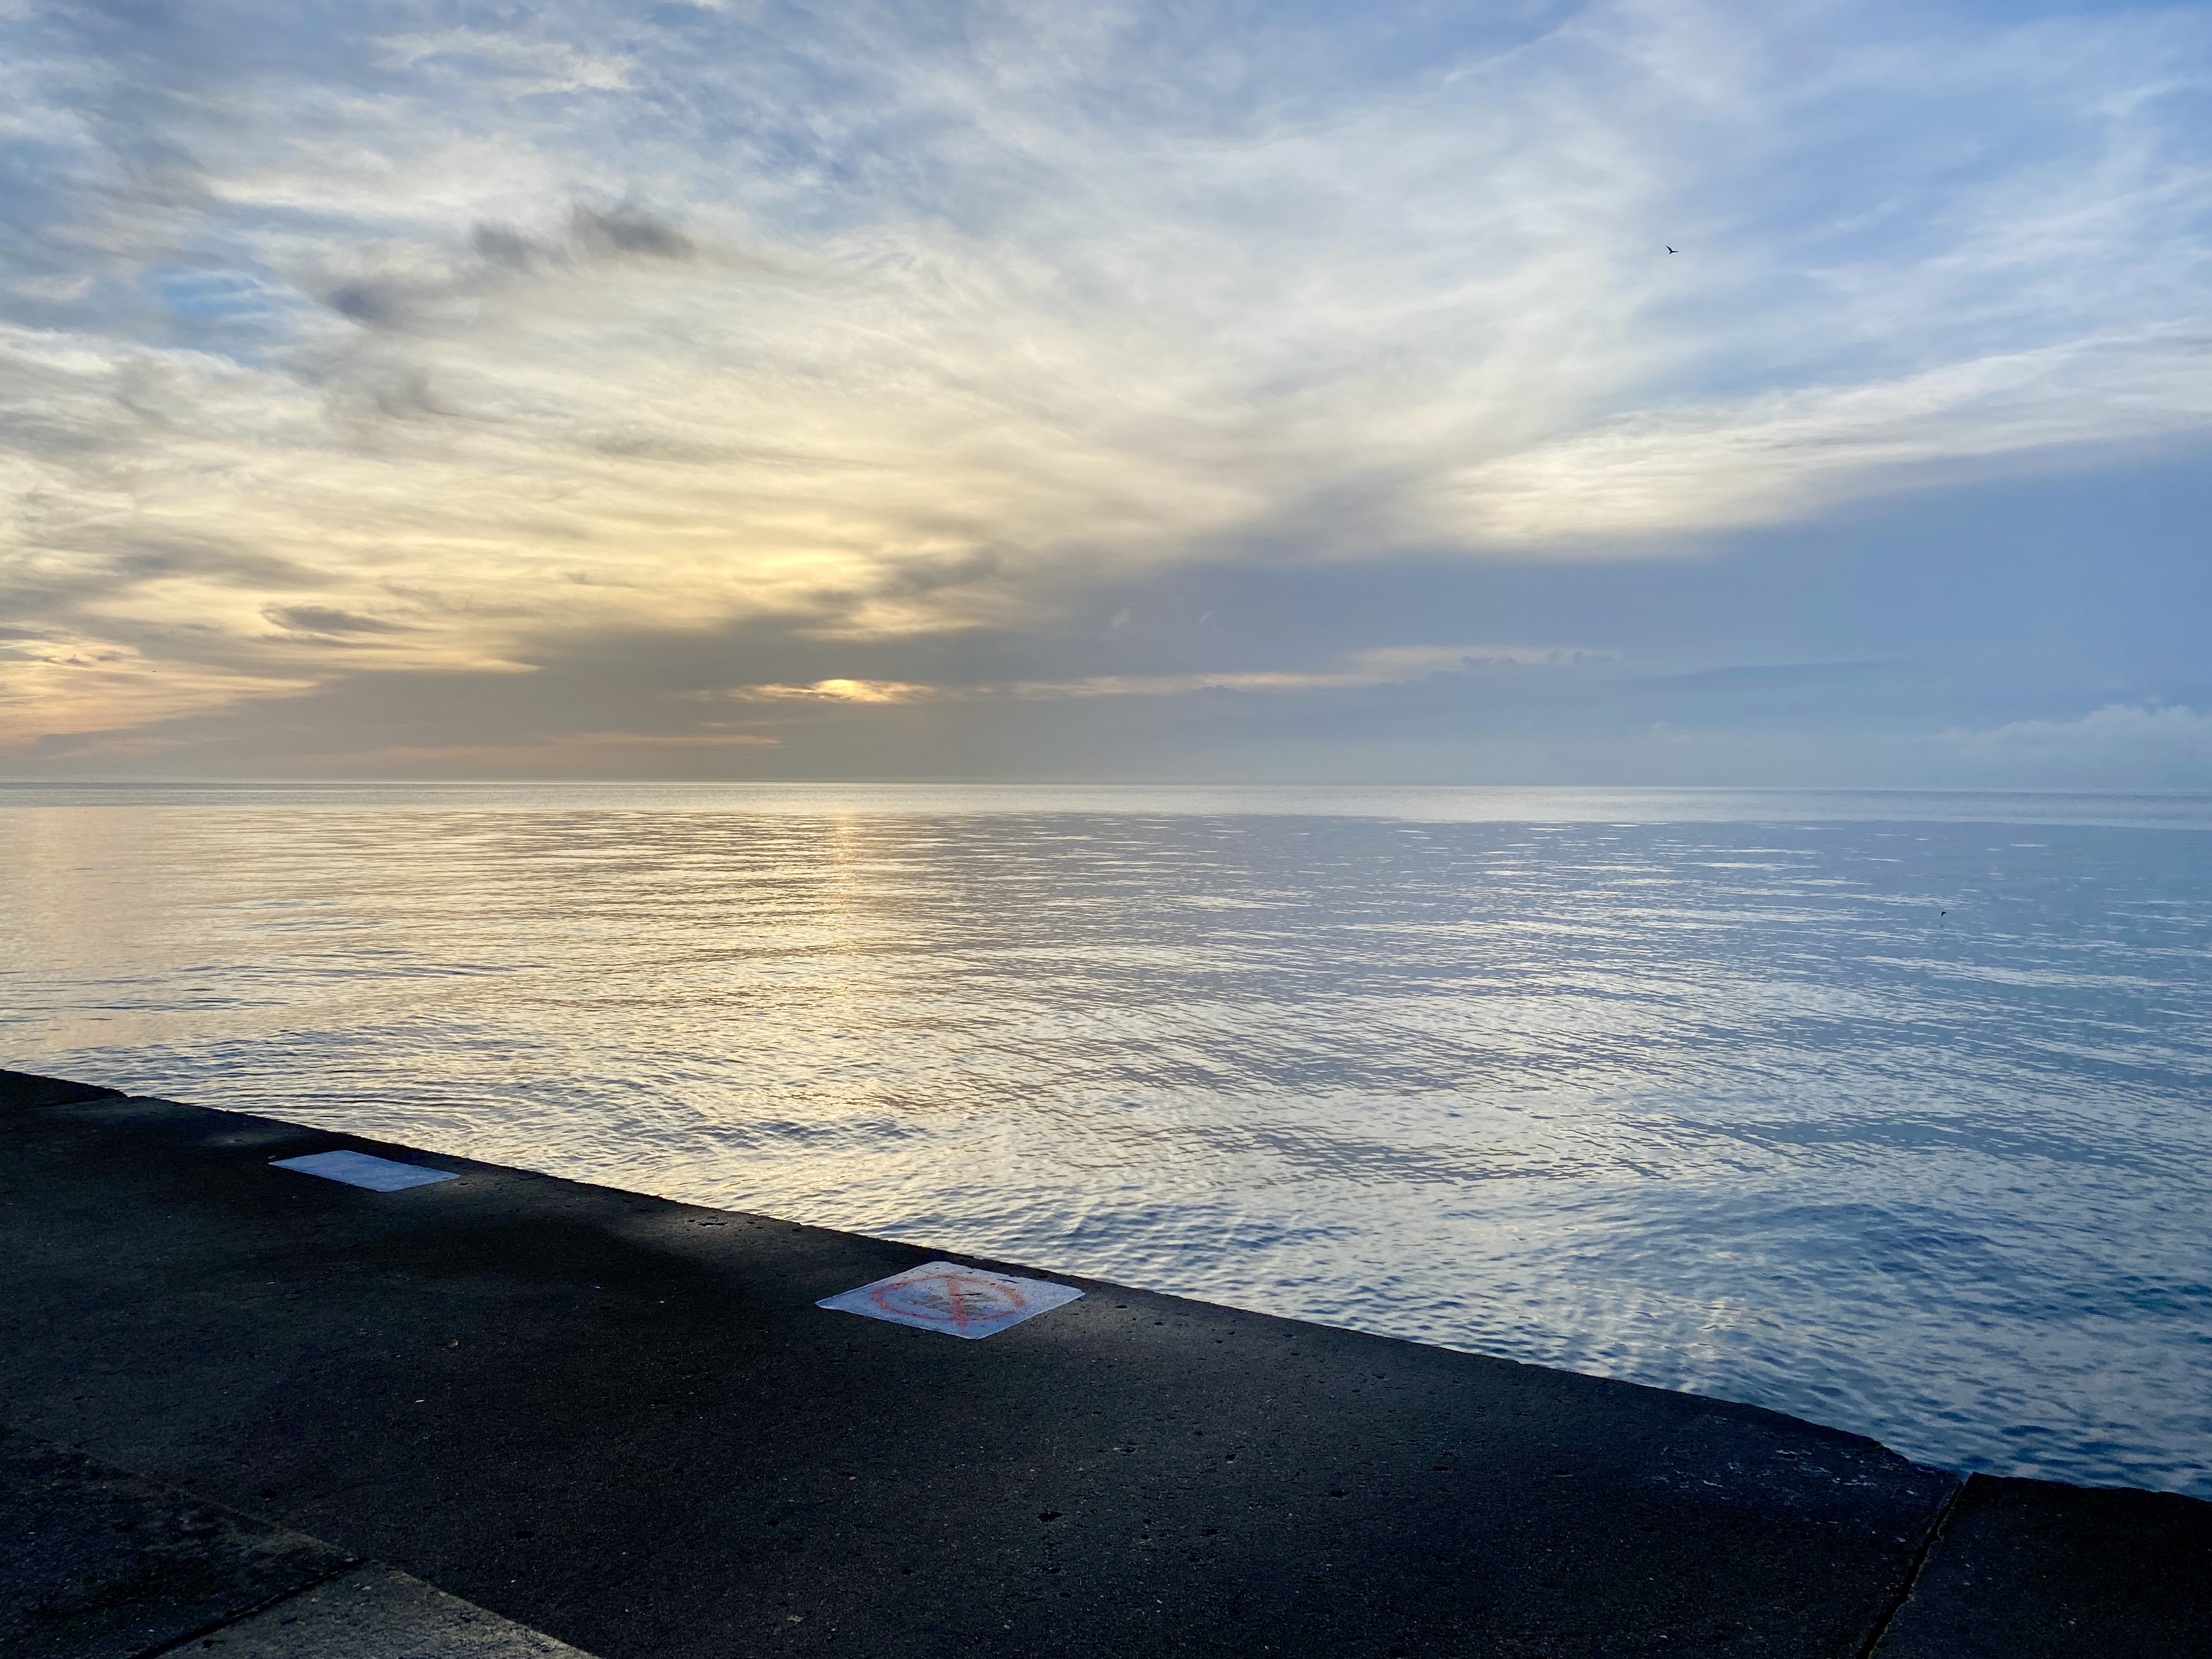 Horizon of a large blue lake below a sky swept with clouds, a pale yellow sunrise peeking through, and an angled strip of dark concrete walkway